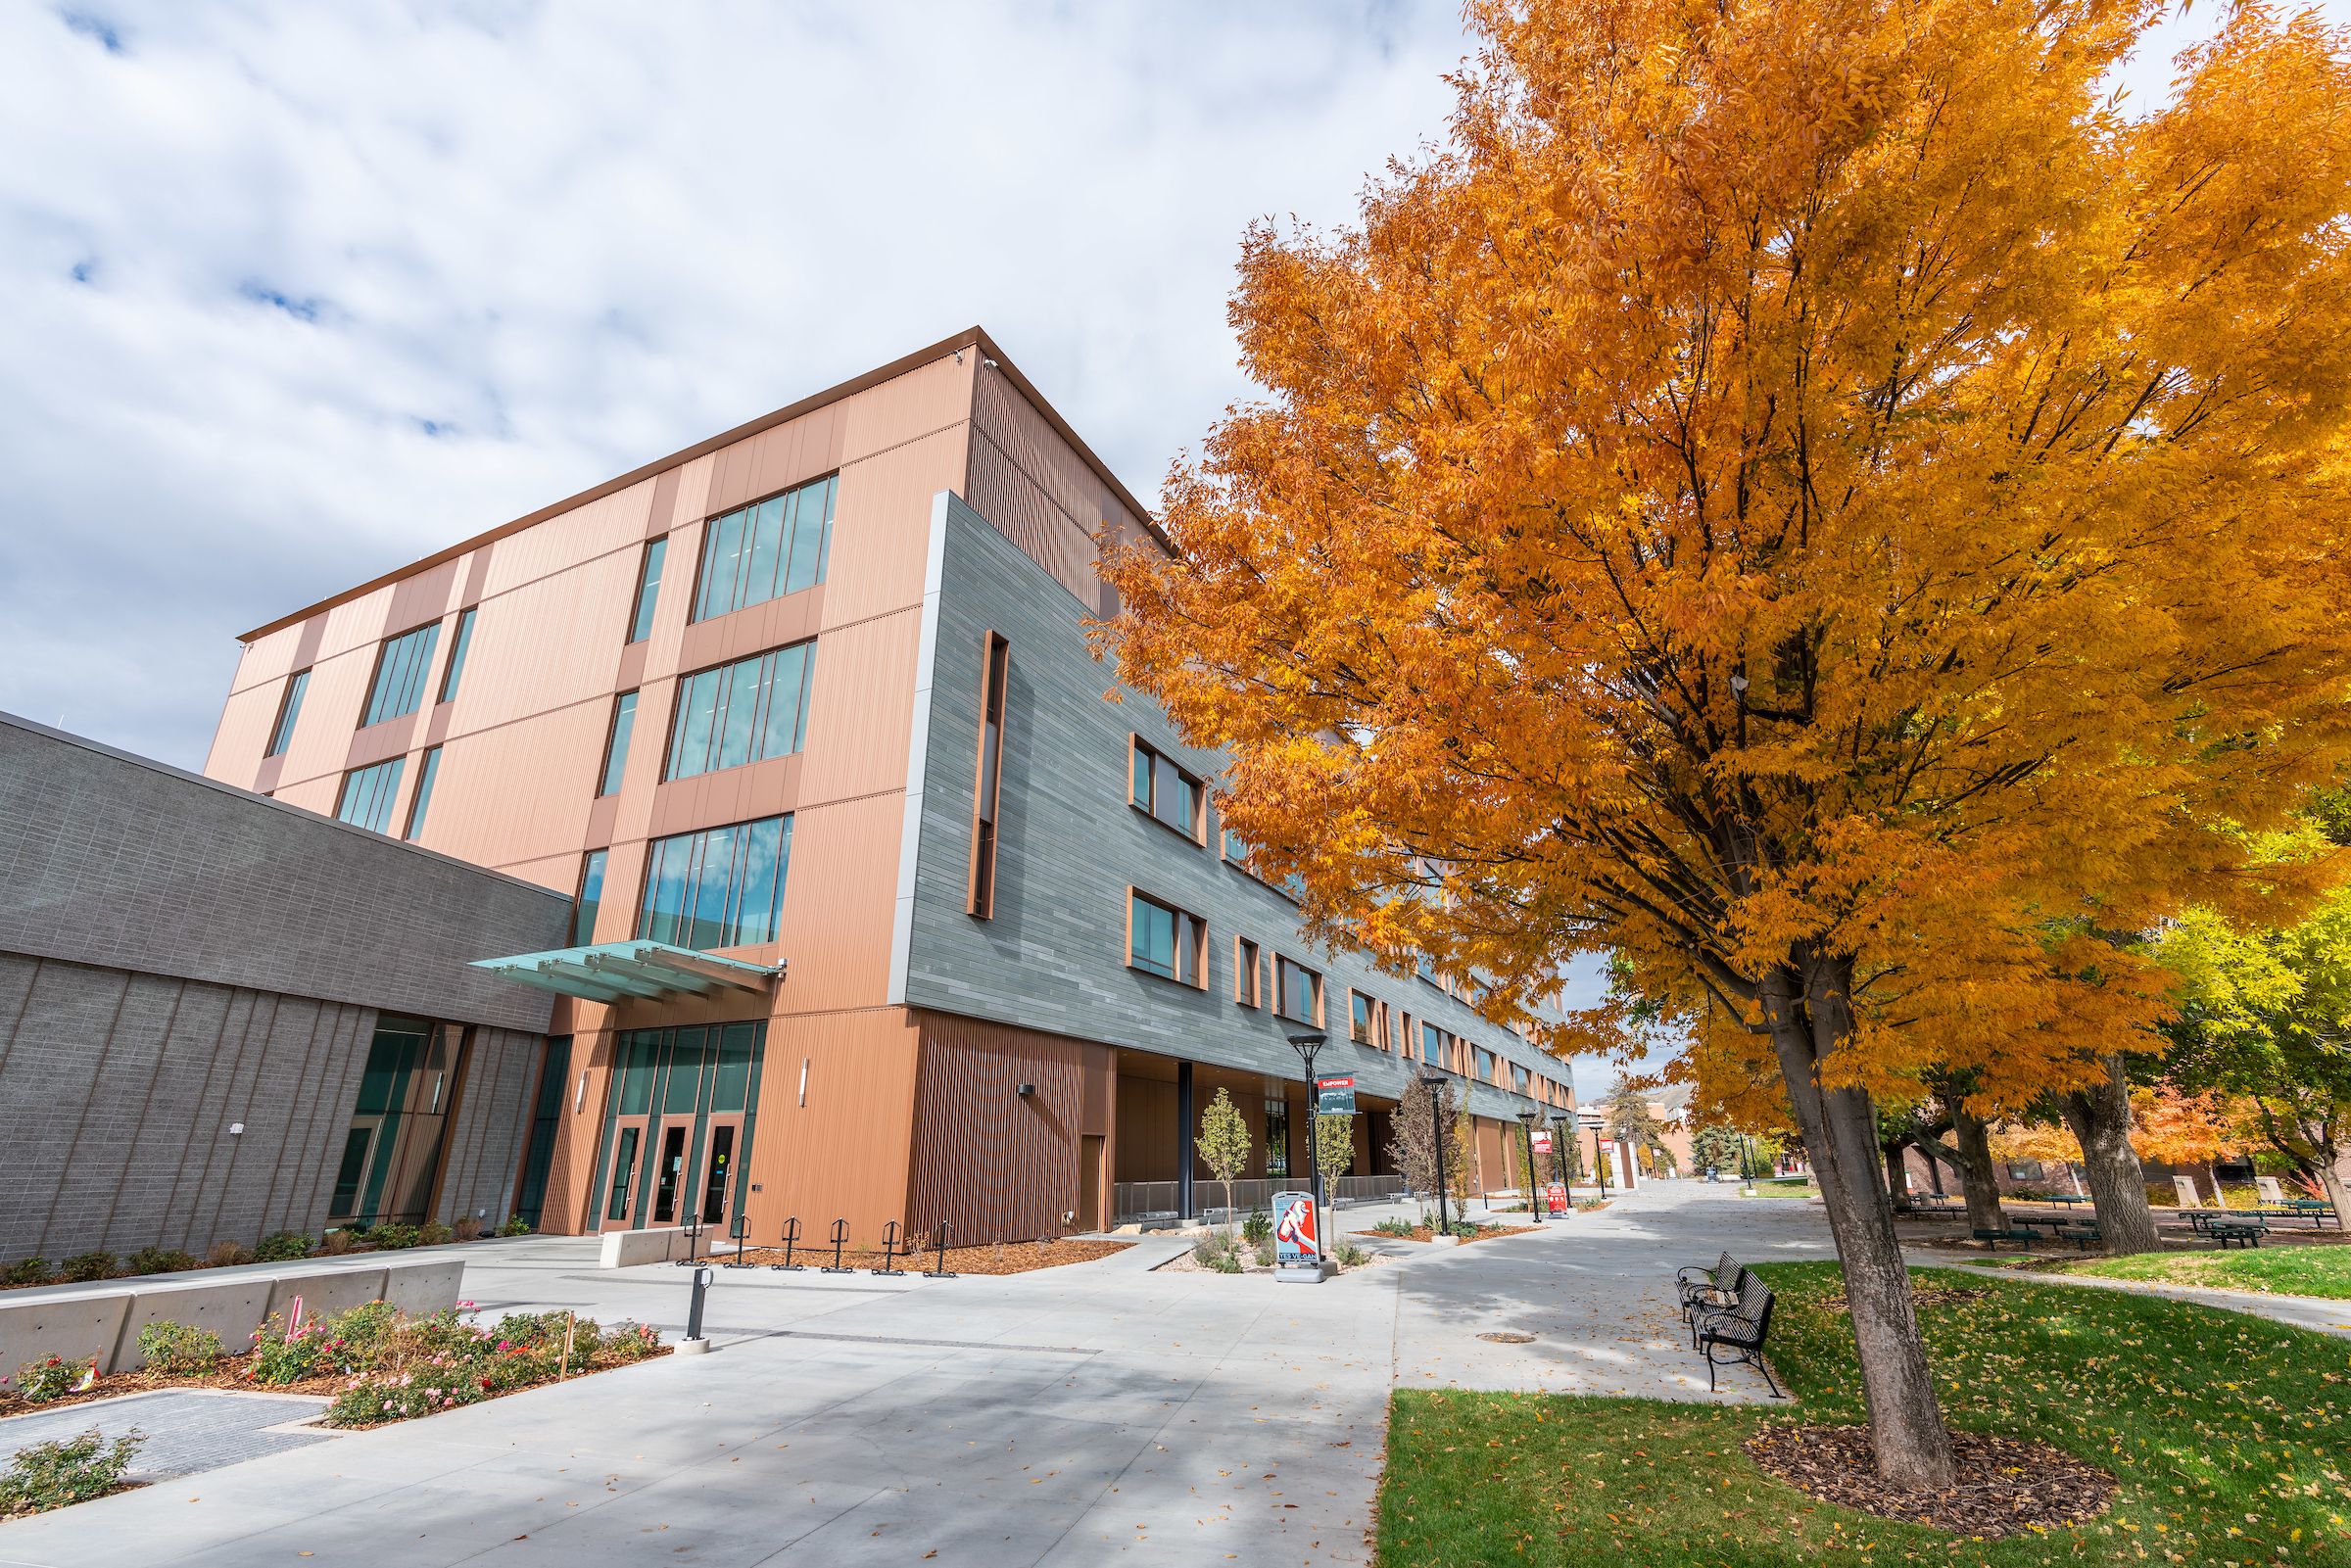 exterior of the Gardner Commons building at the University of Utah surrounded by trees with autumn foliage